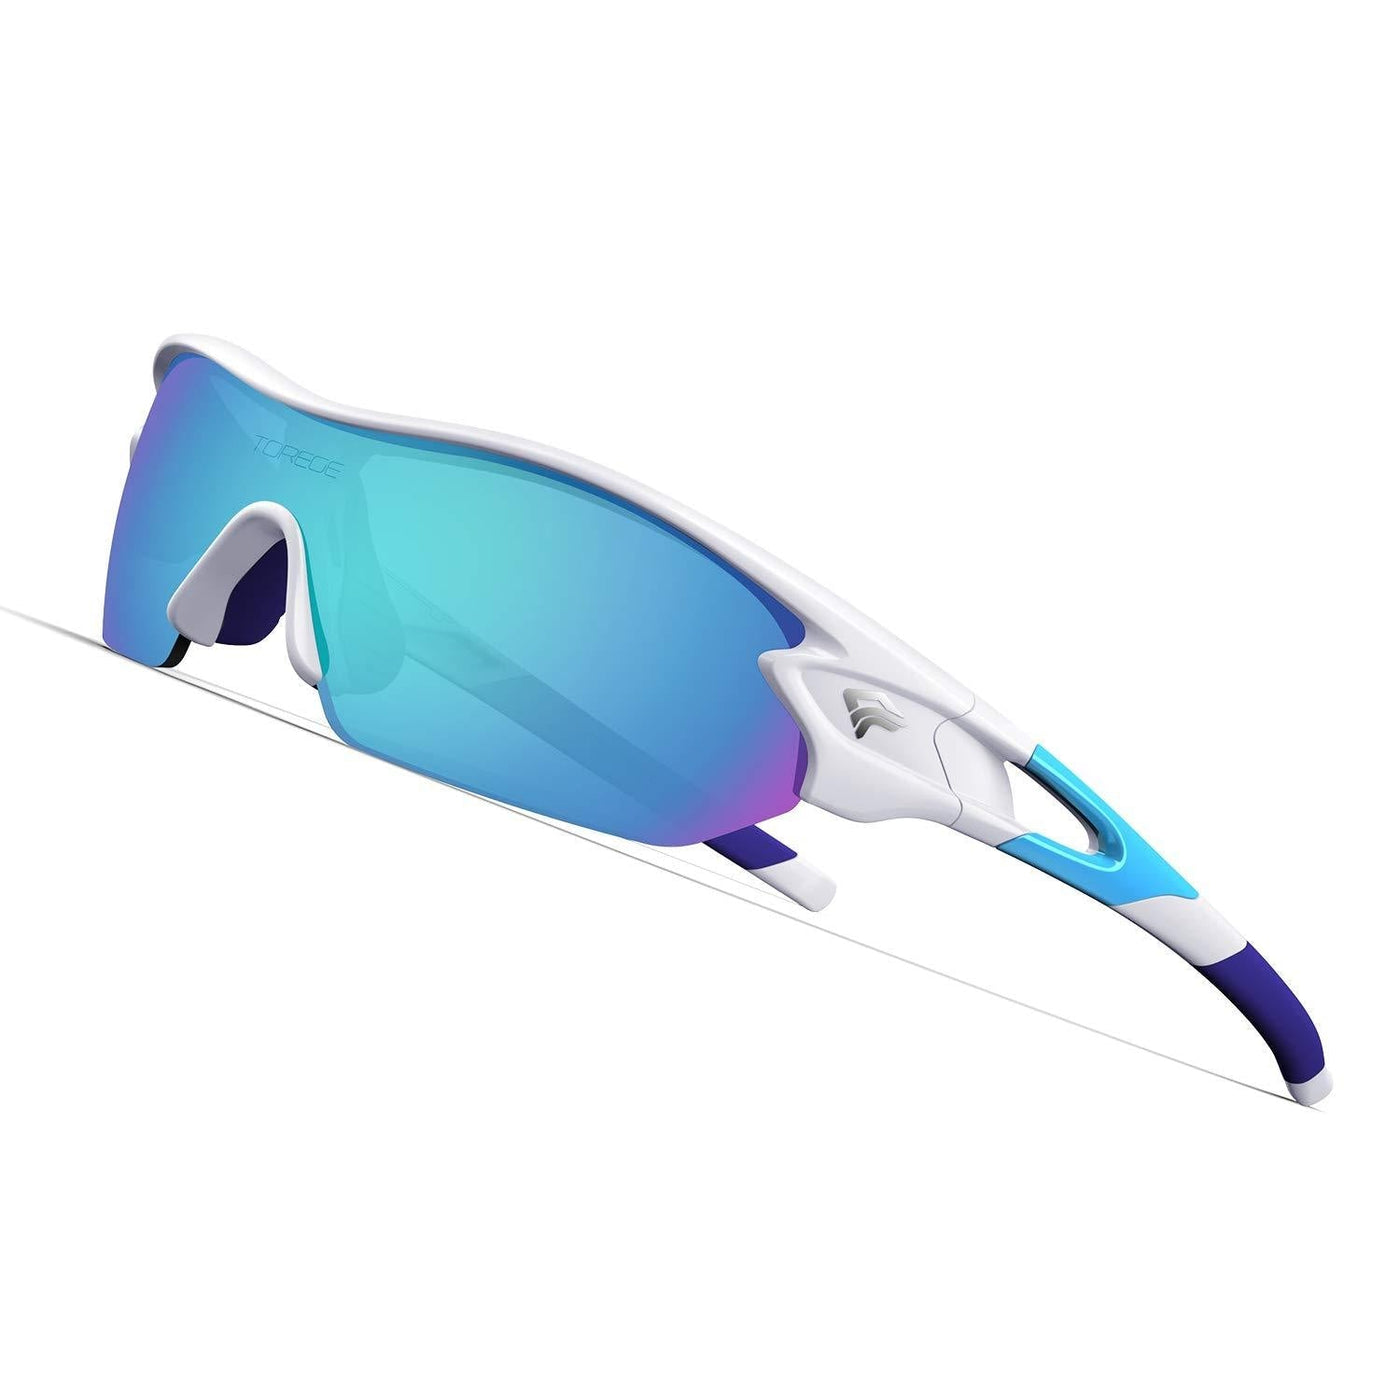 Buy TOREGE Polarized Sports Sunglasses with 3 Interchangeable